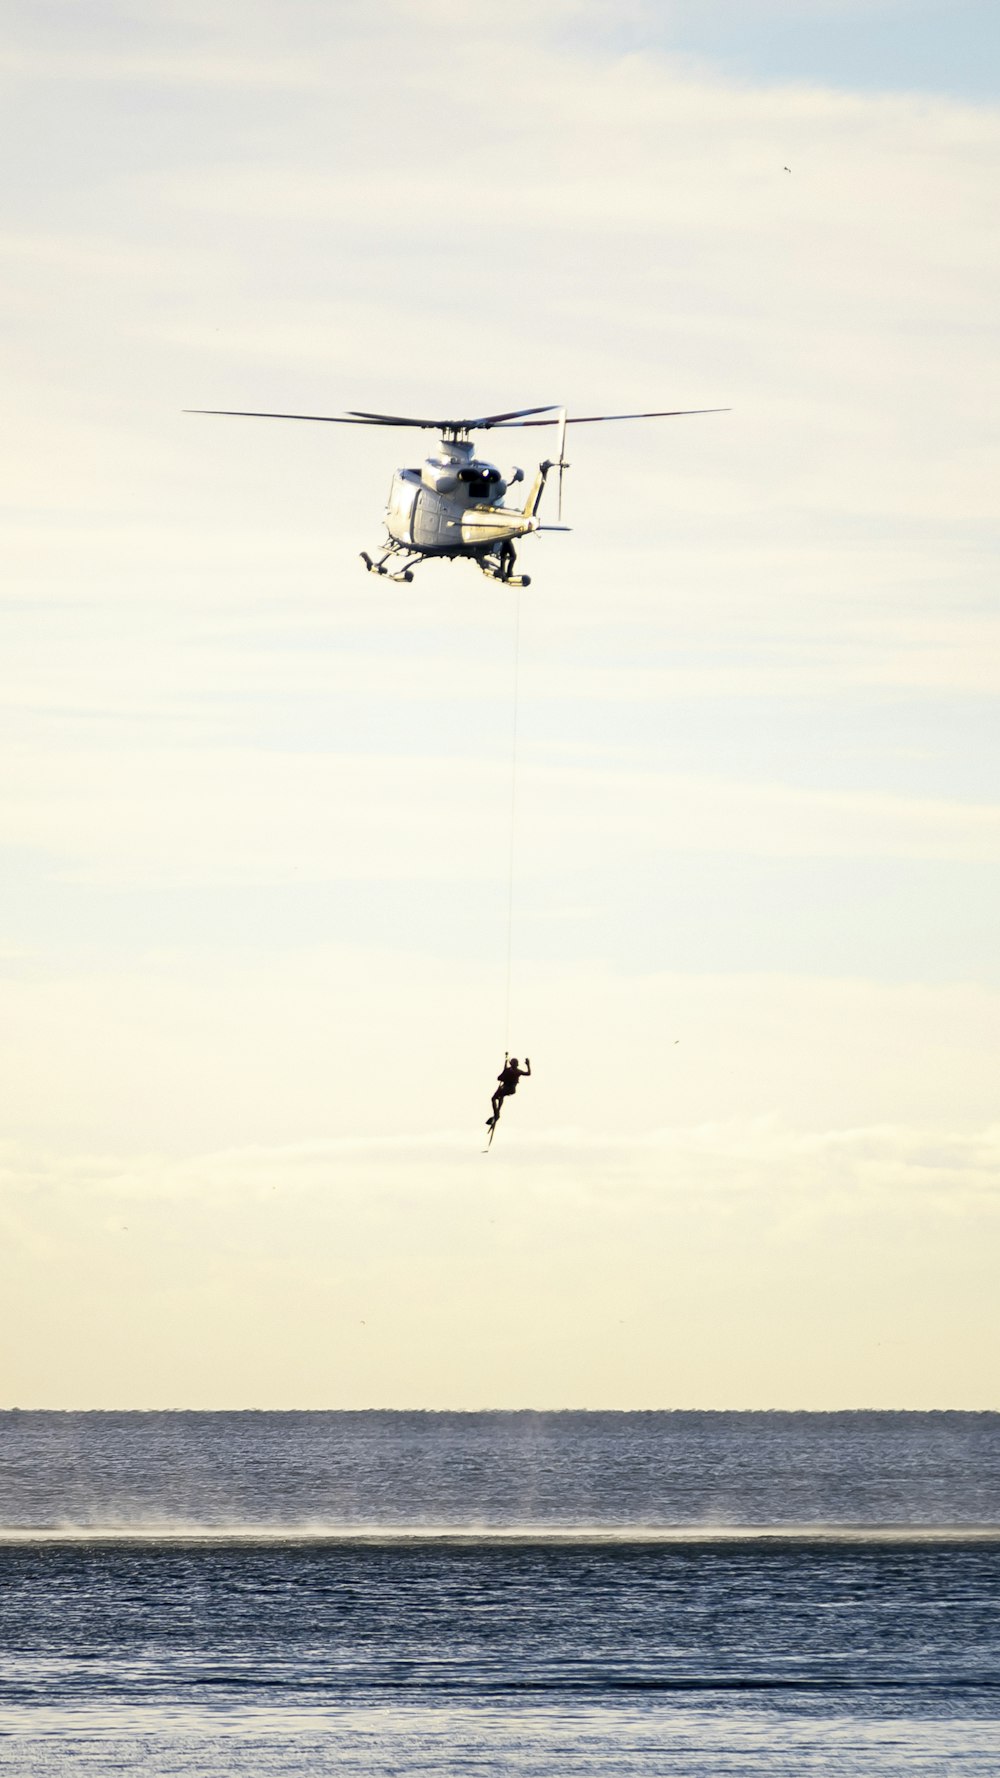 a helicopter and a person in the air with a parachute